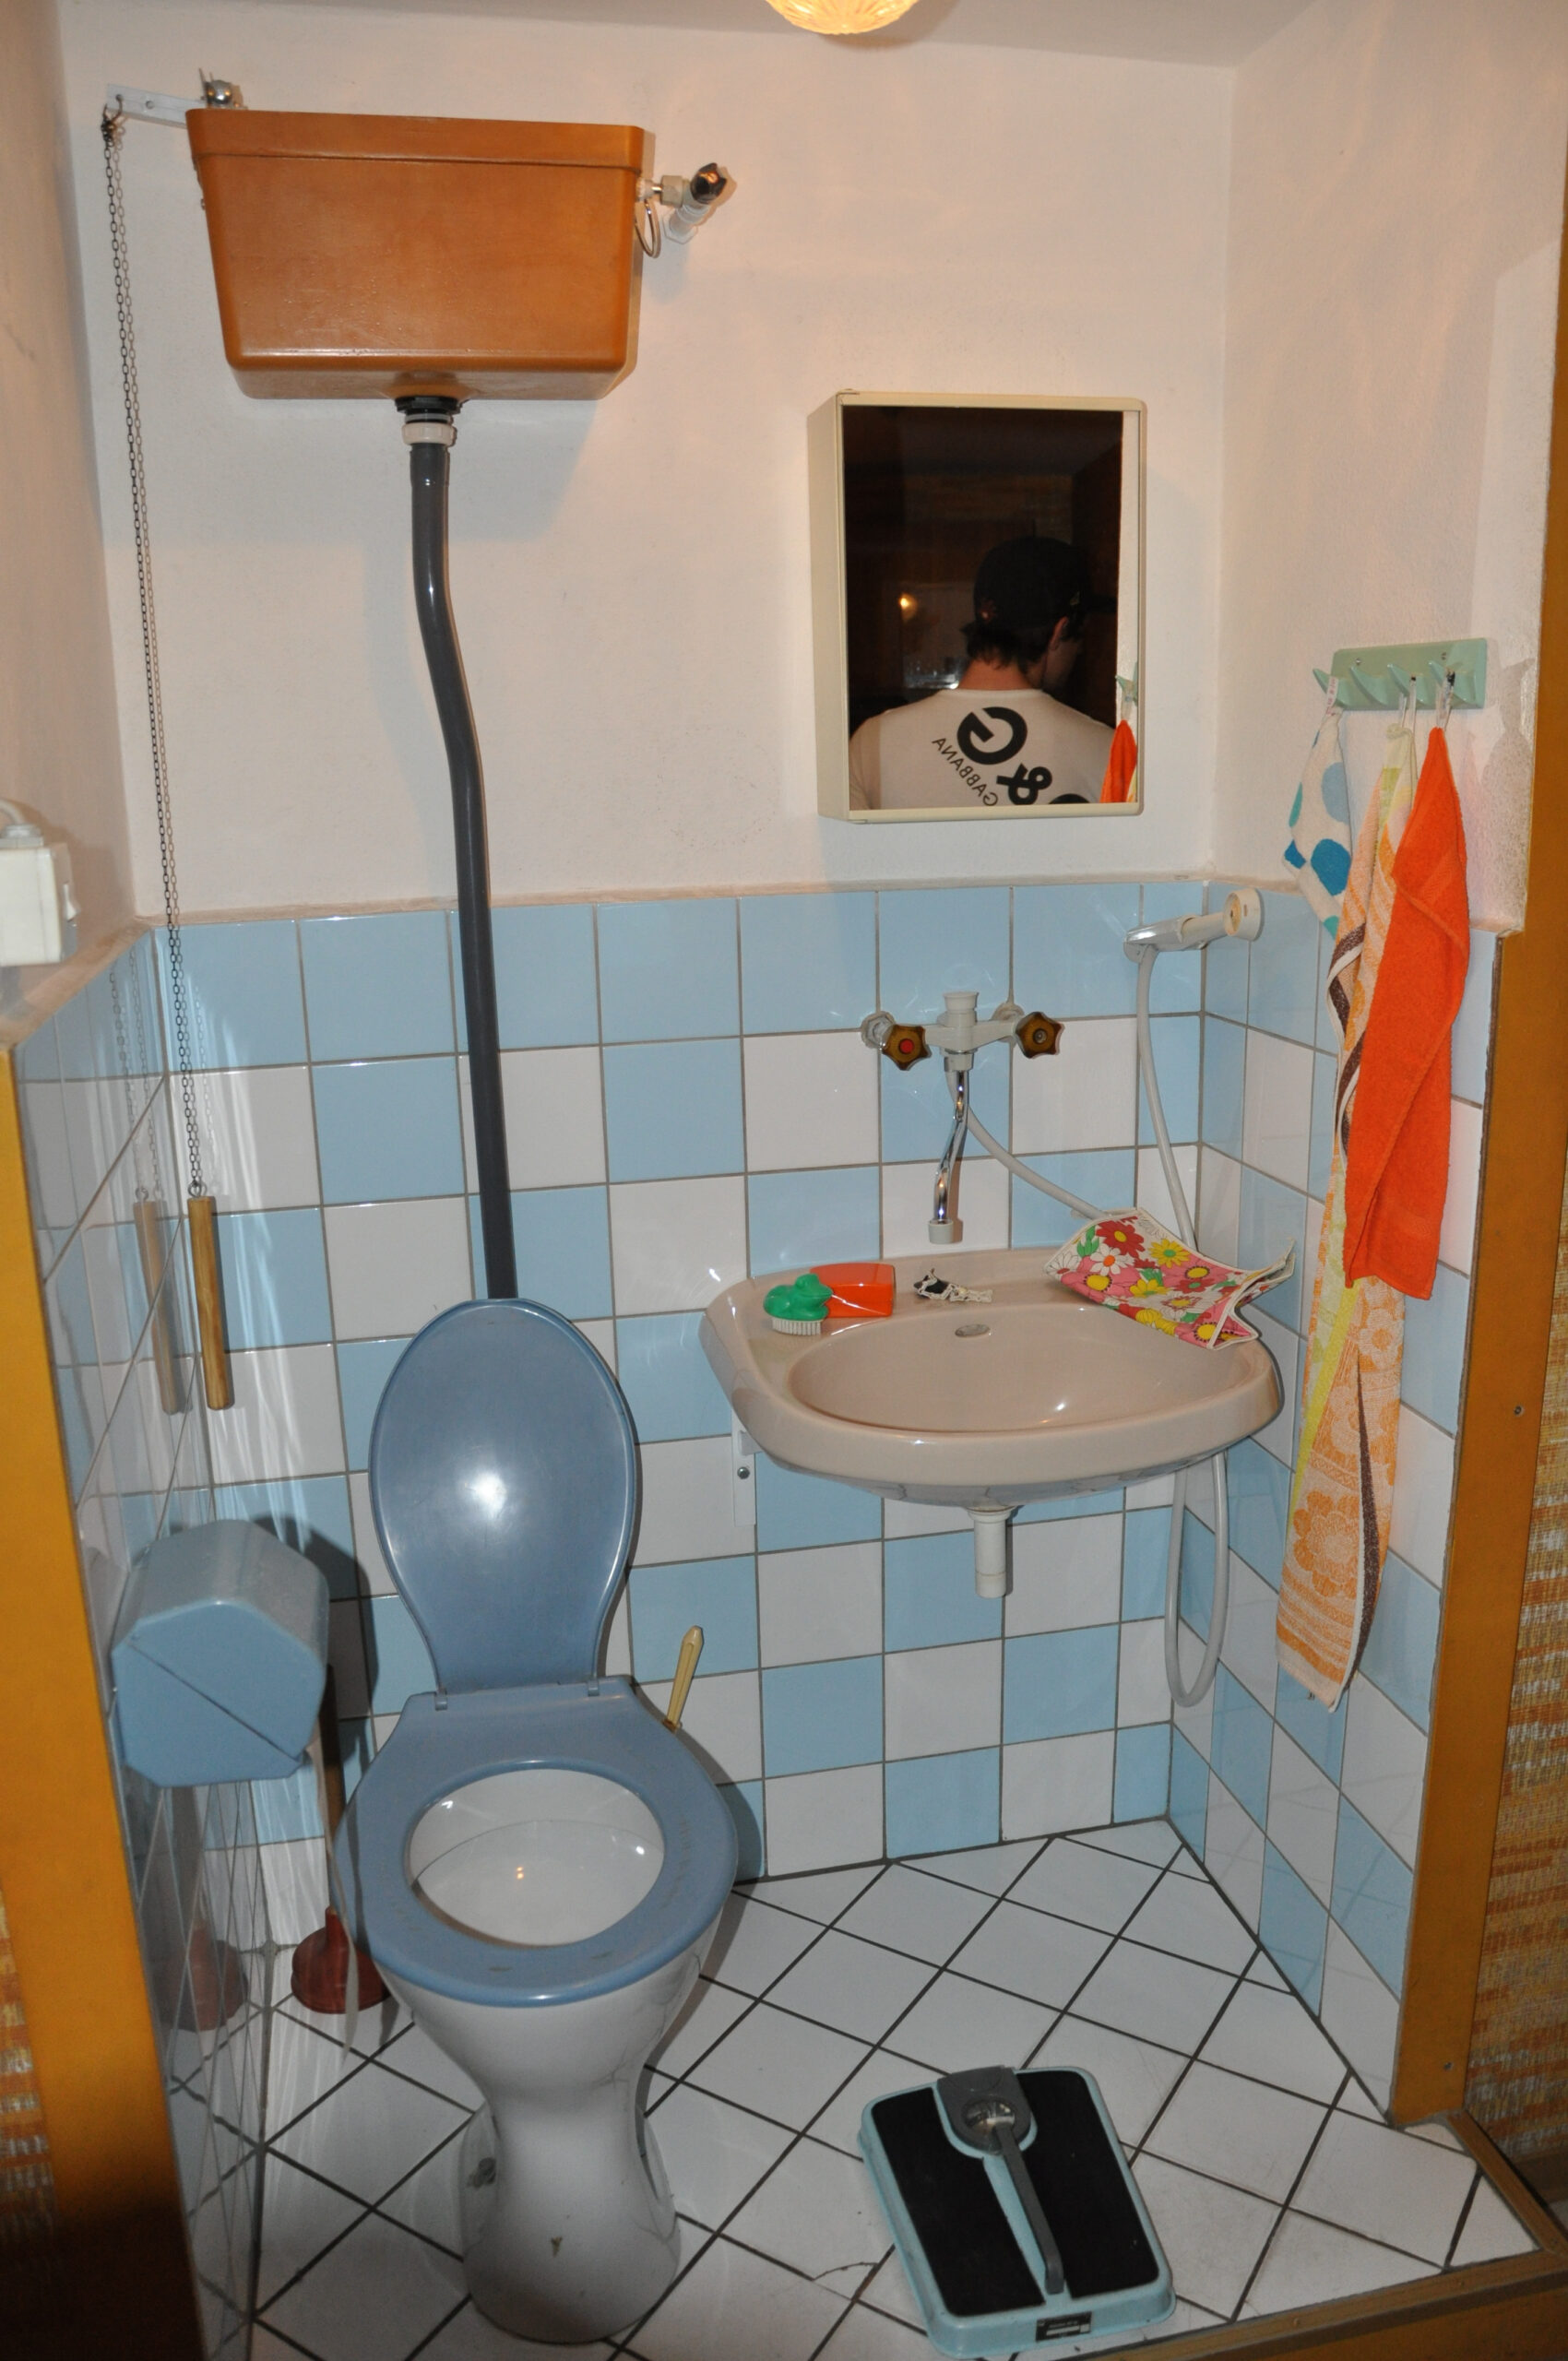 File:ddr-Museum Berlin Bad Mit Toilette - Wikimedia Commons throughout Ddr Badezimmer